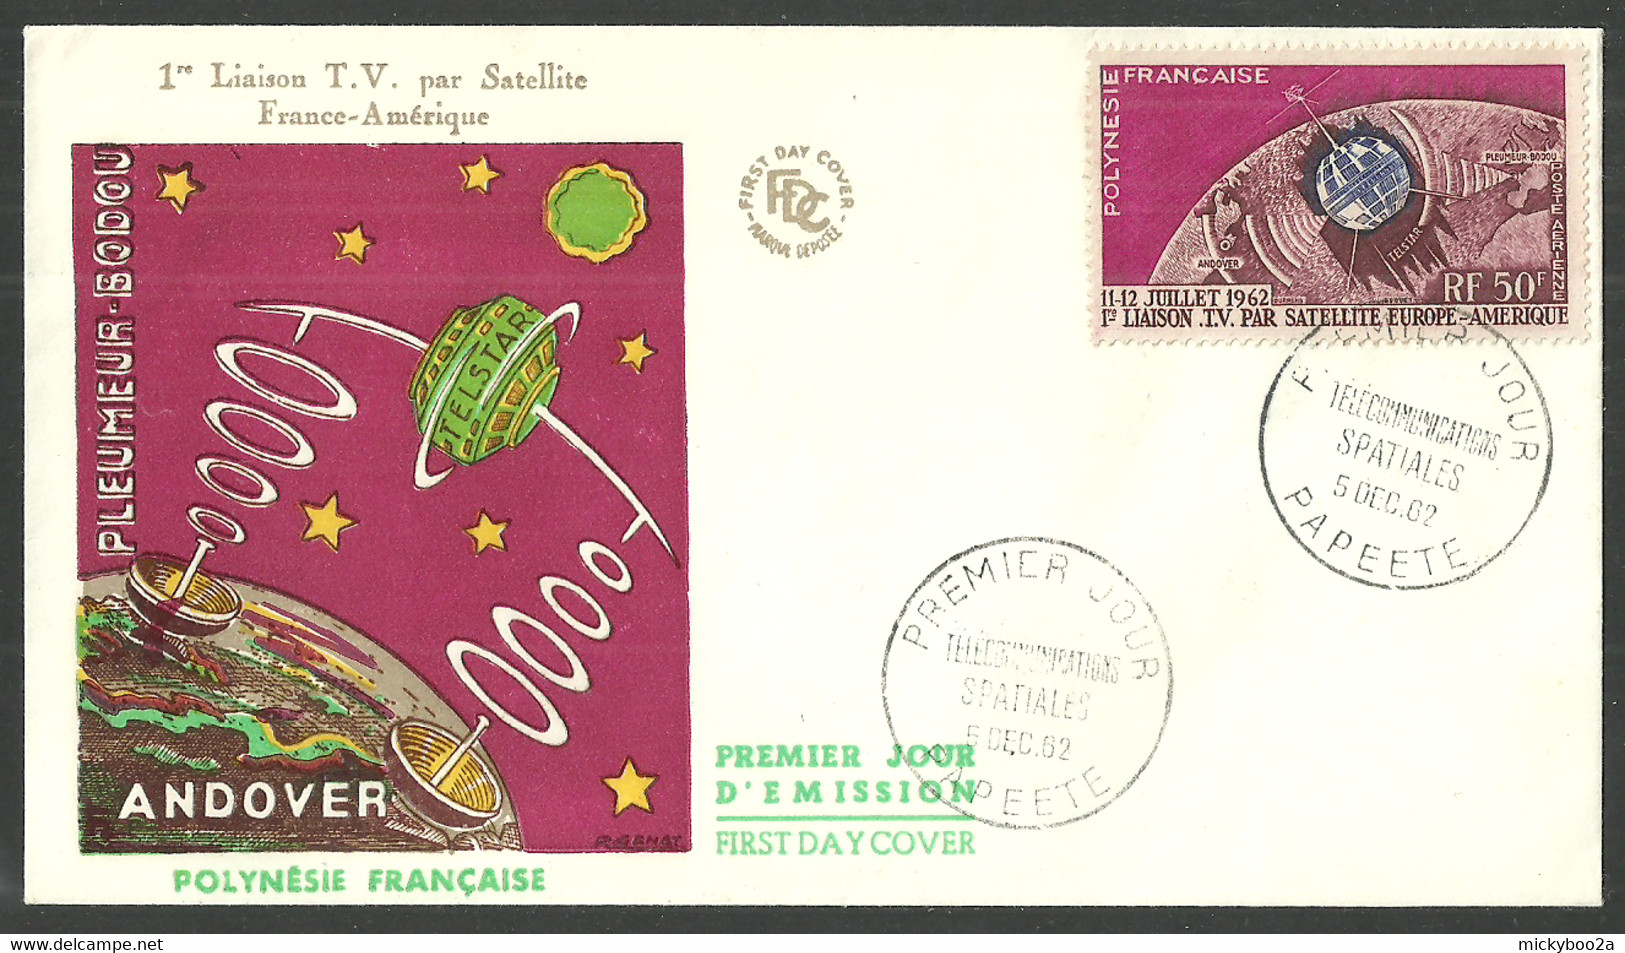 FRENCH POLYNESIA 1962 TELSTAR TV SATELLITE COMMUNICATIONS FIRST DAY COVER FDC - Covers & Documents